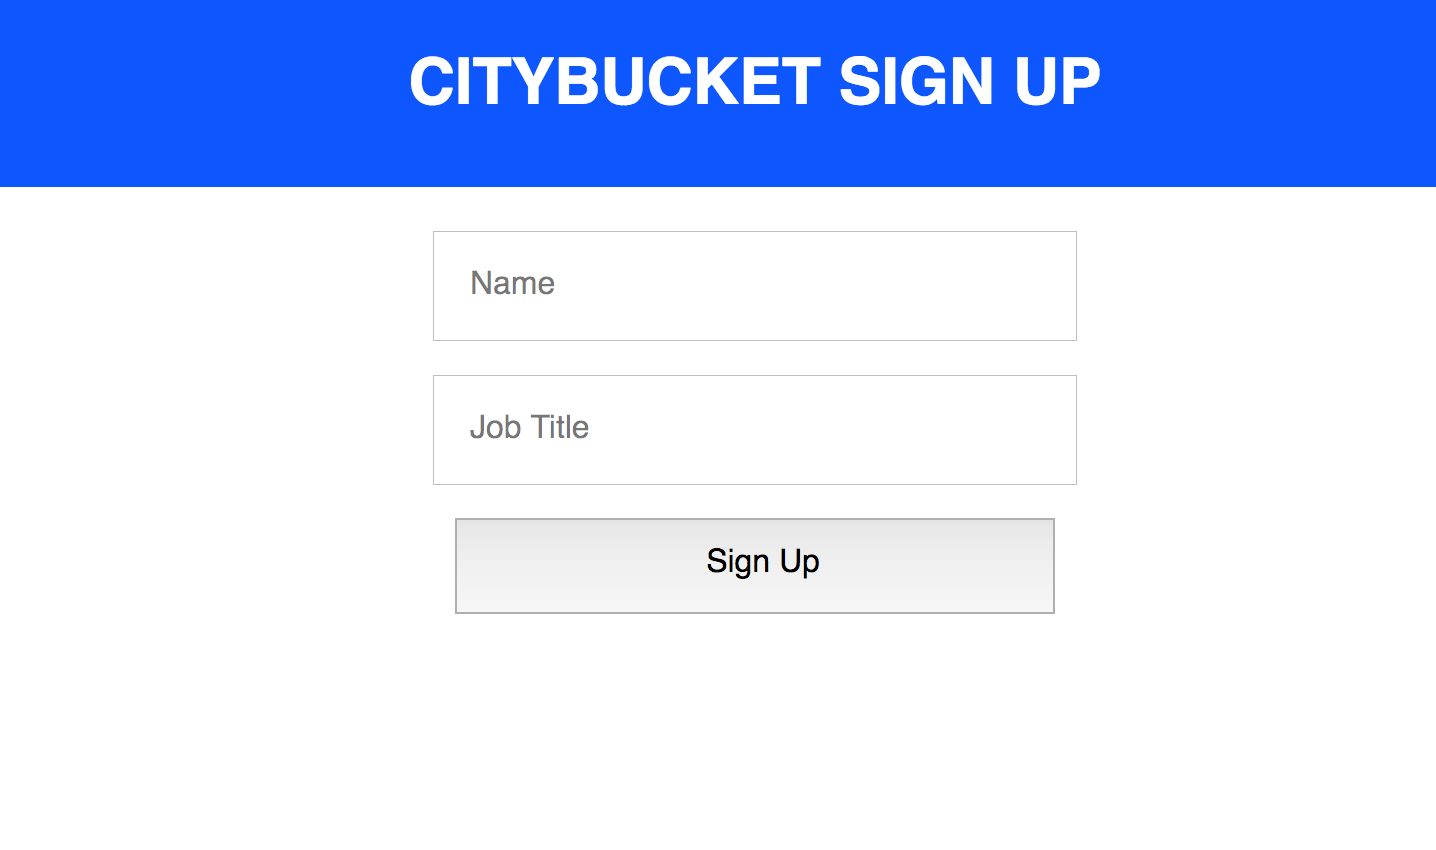 The Sign Up page